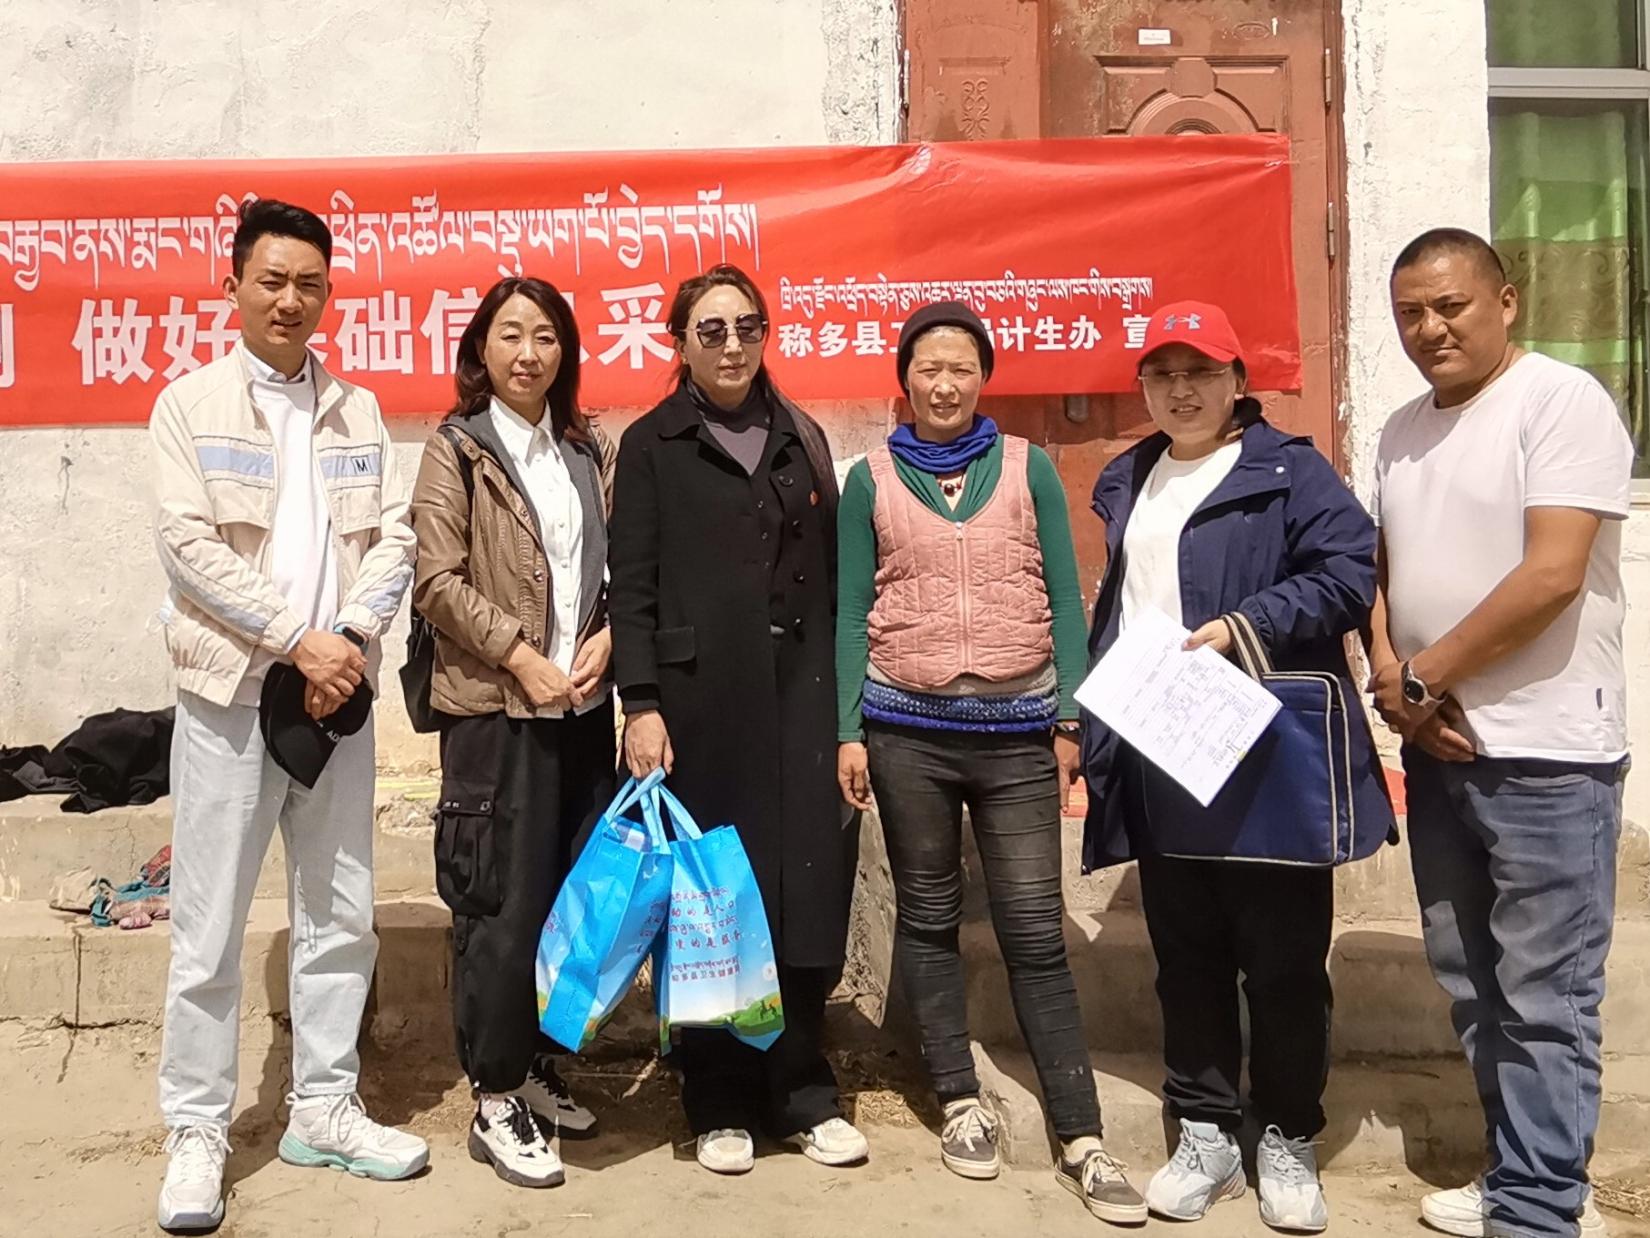 Sun Daomin (second left) with local staff during a household survey on women’s reproductive health in Chengduo county, March 2022